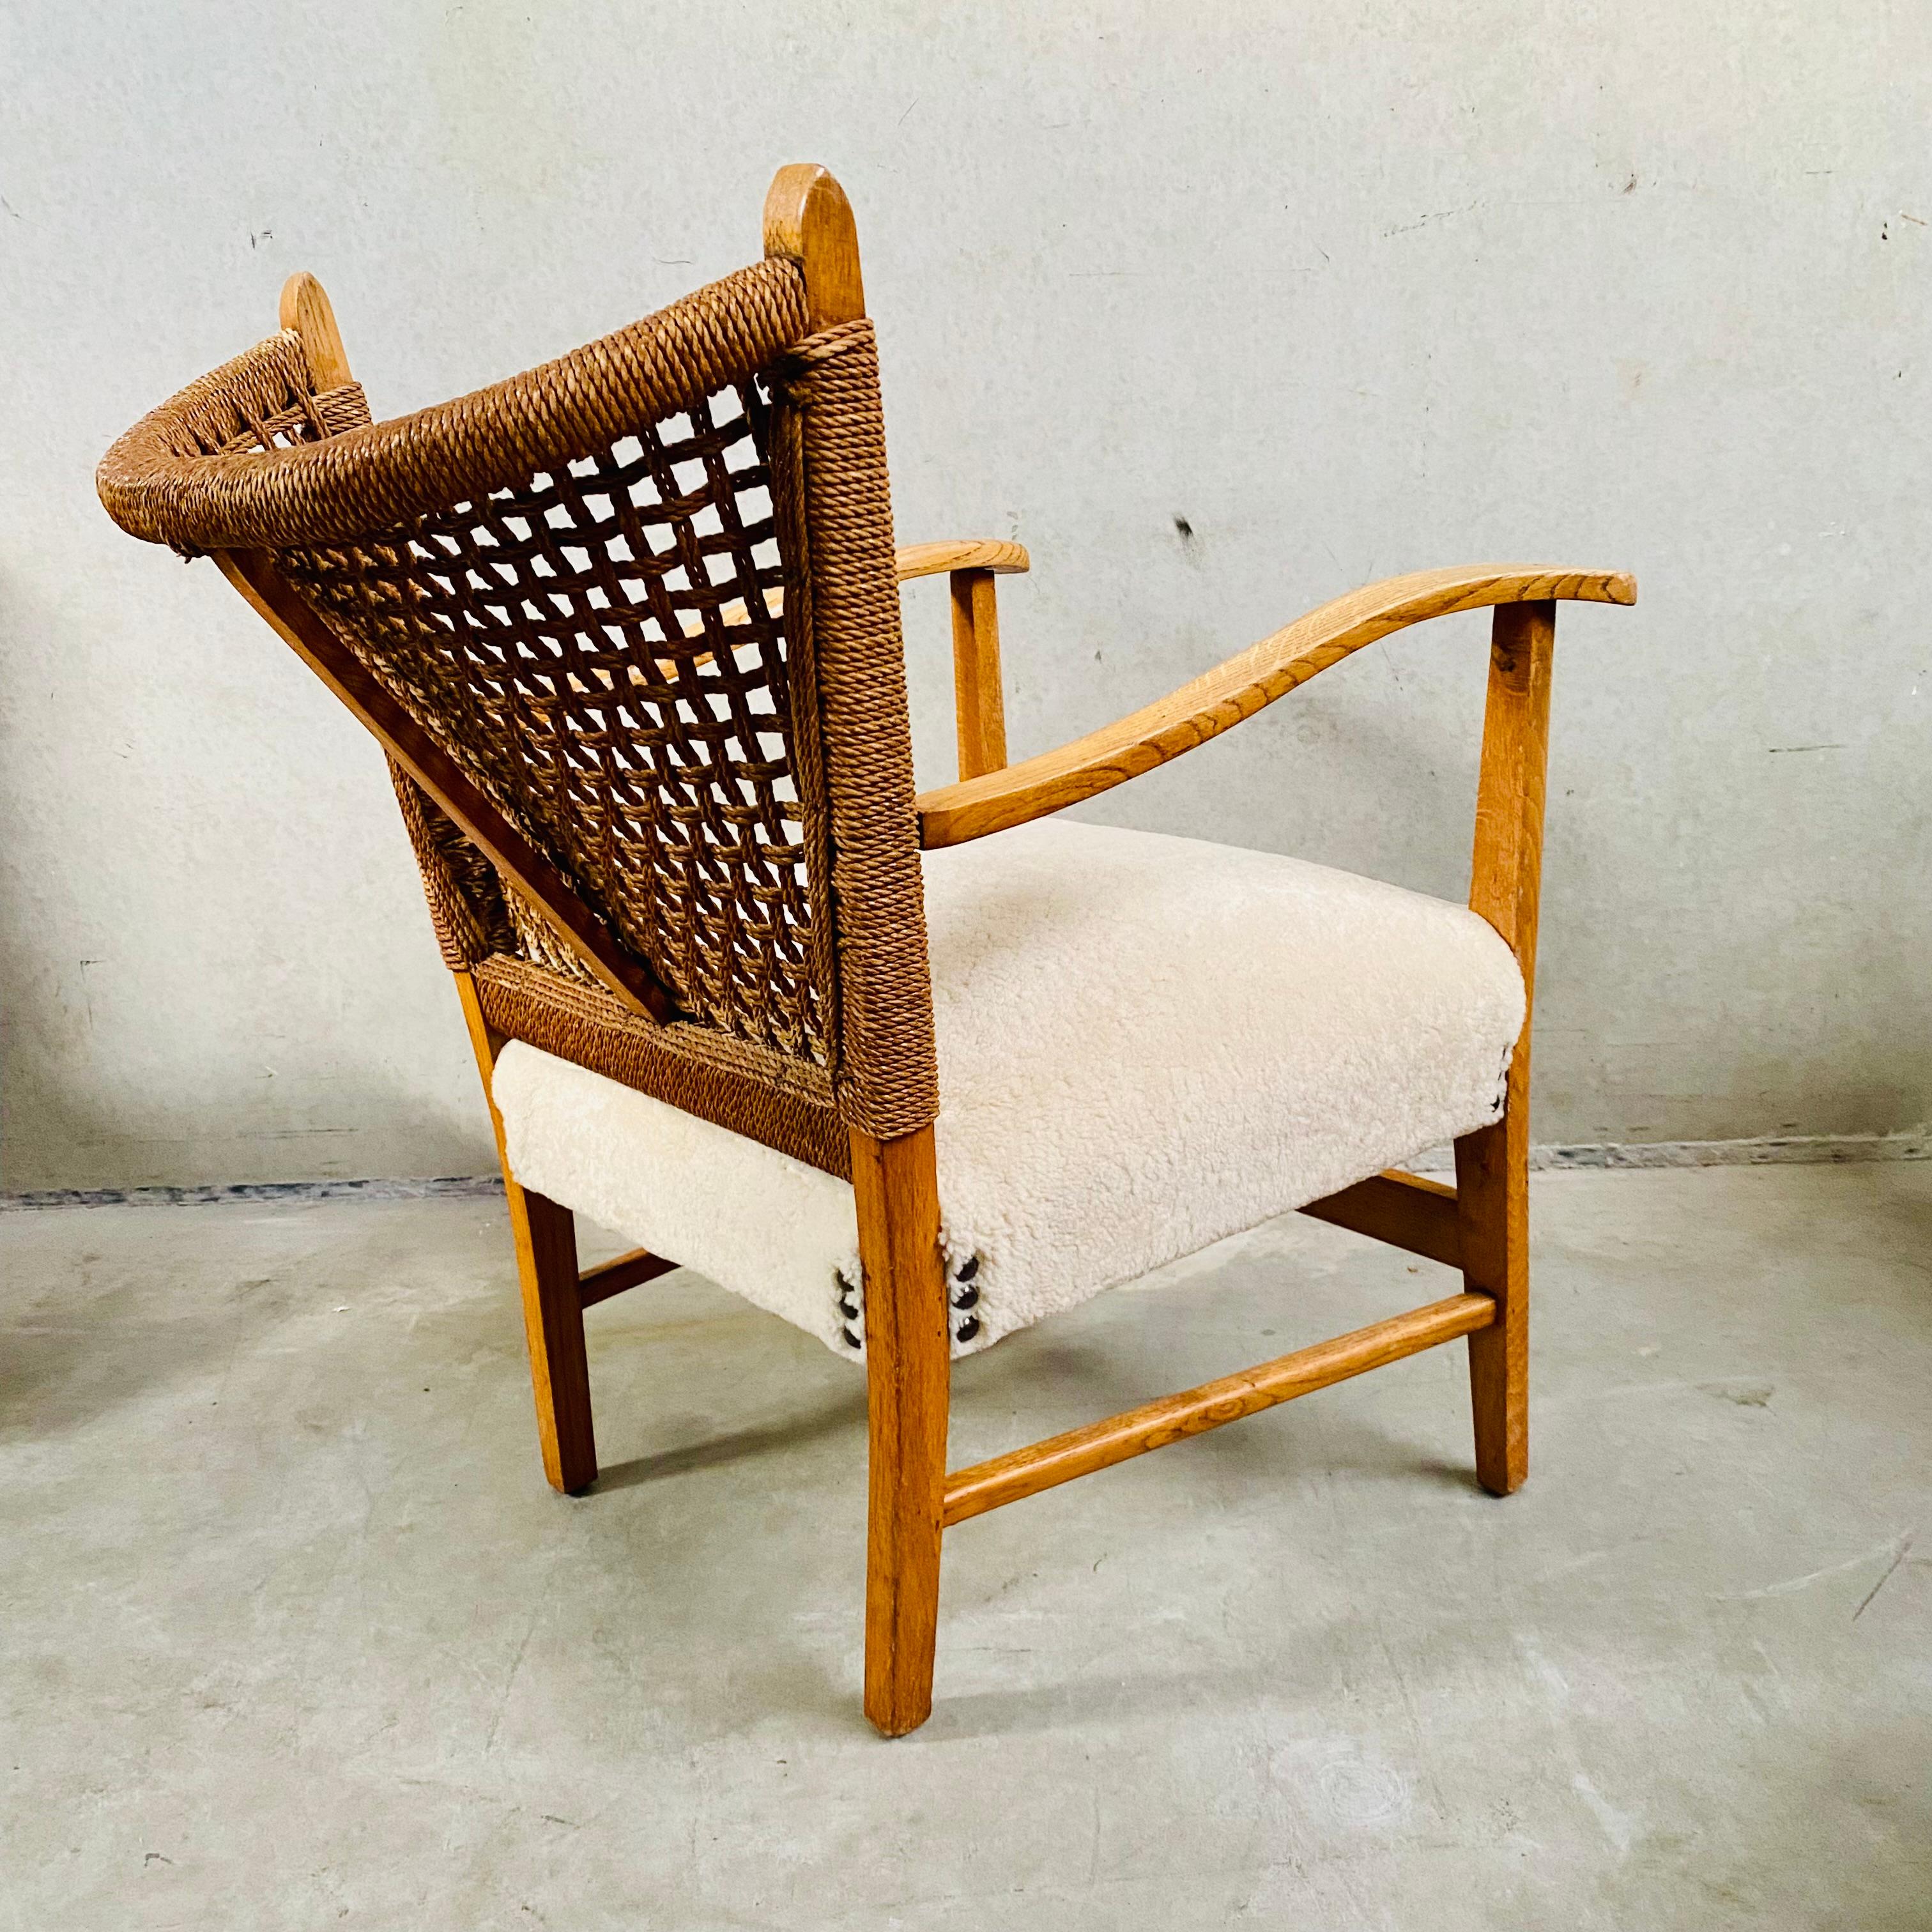 Rope, Oak and Sheepskin Arm Chair by Bas Van Pelt, Netherlands 1940 For Sale 8